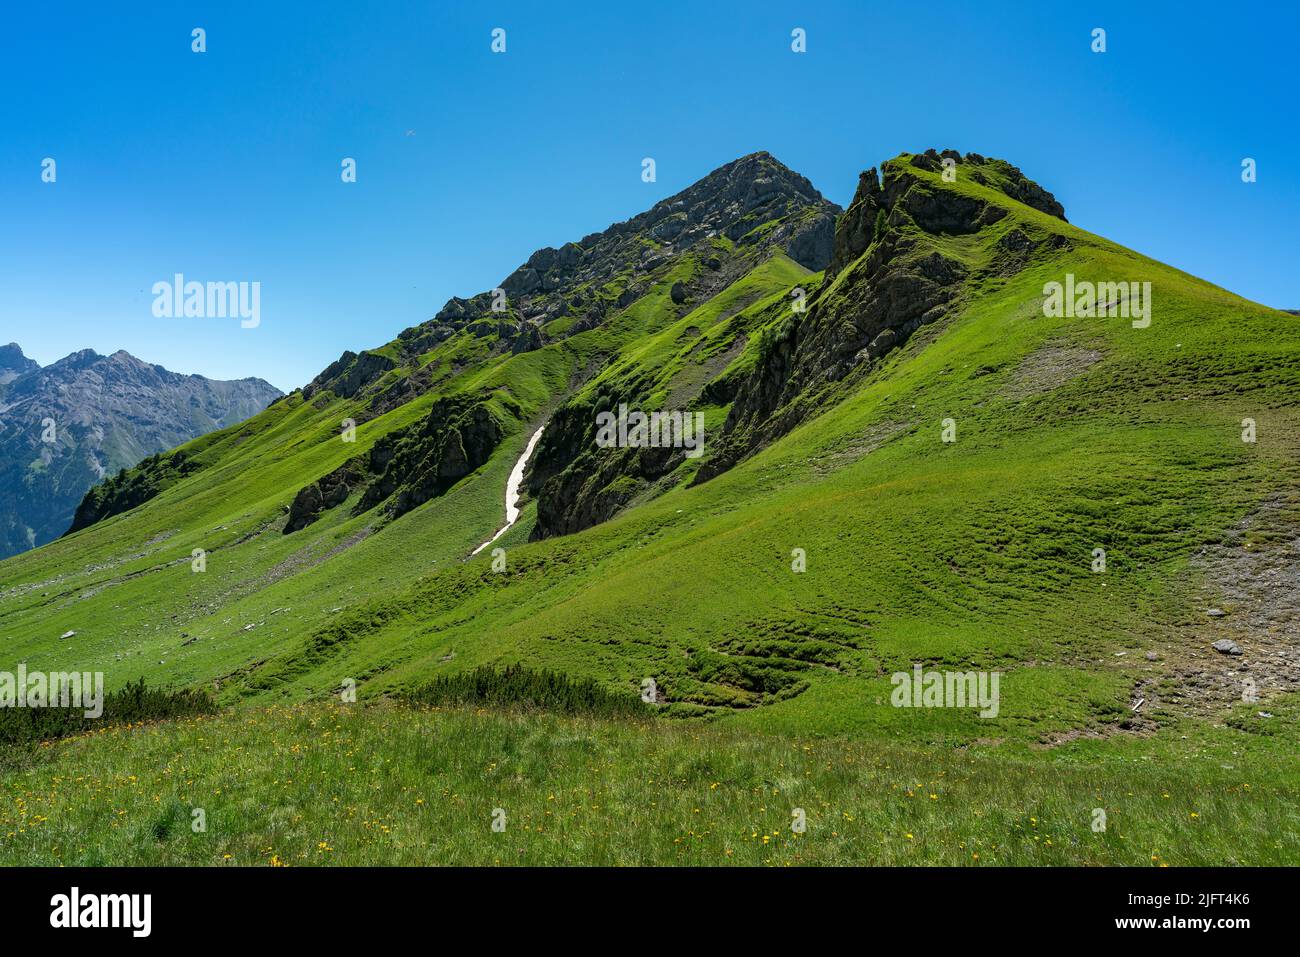 Panoramic view from Amatschonjoch to the valley of Brand with rocky mountains and a little snow field in the green alpine meadows Stock Photo